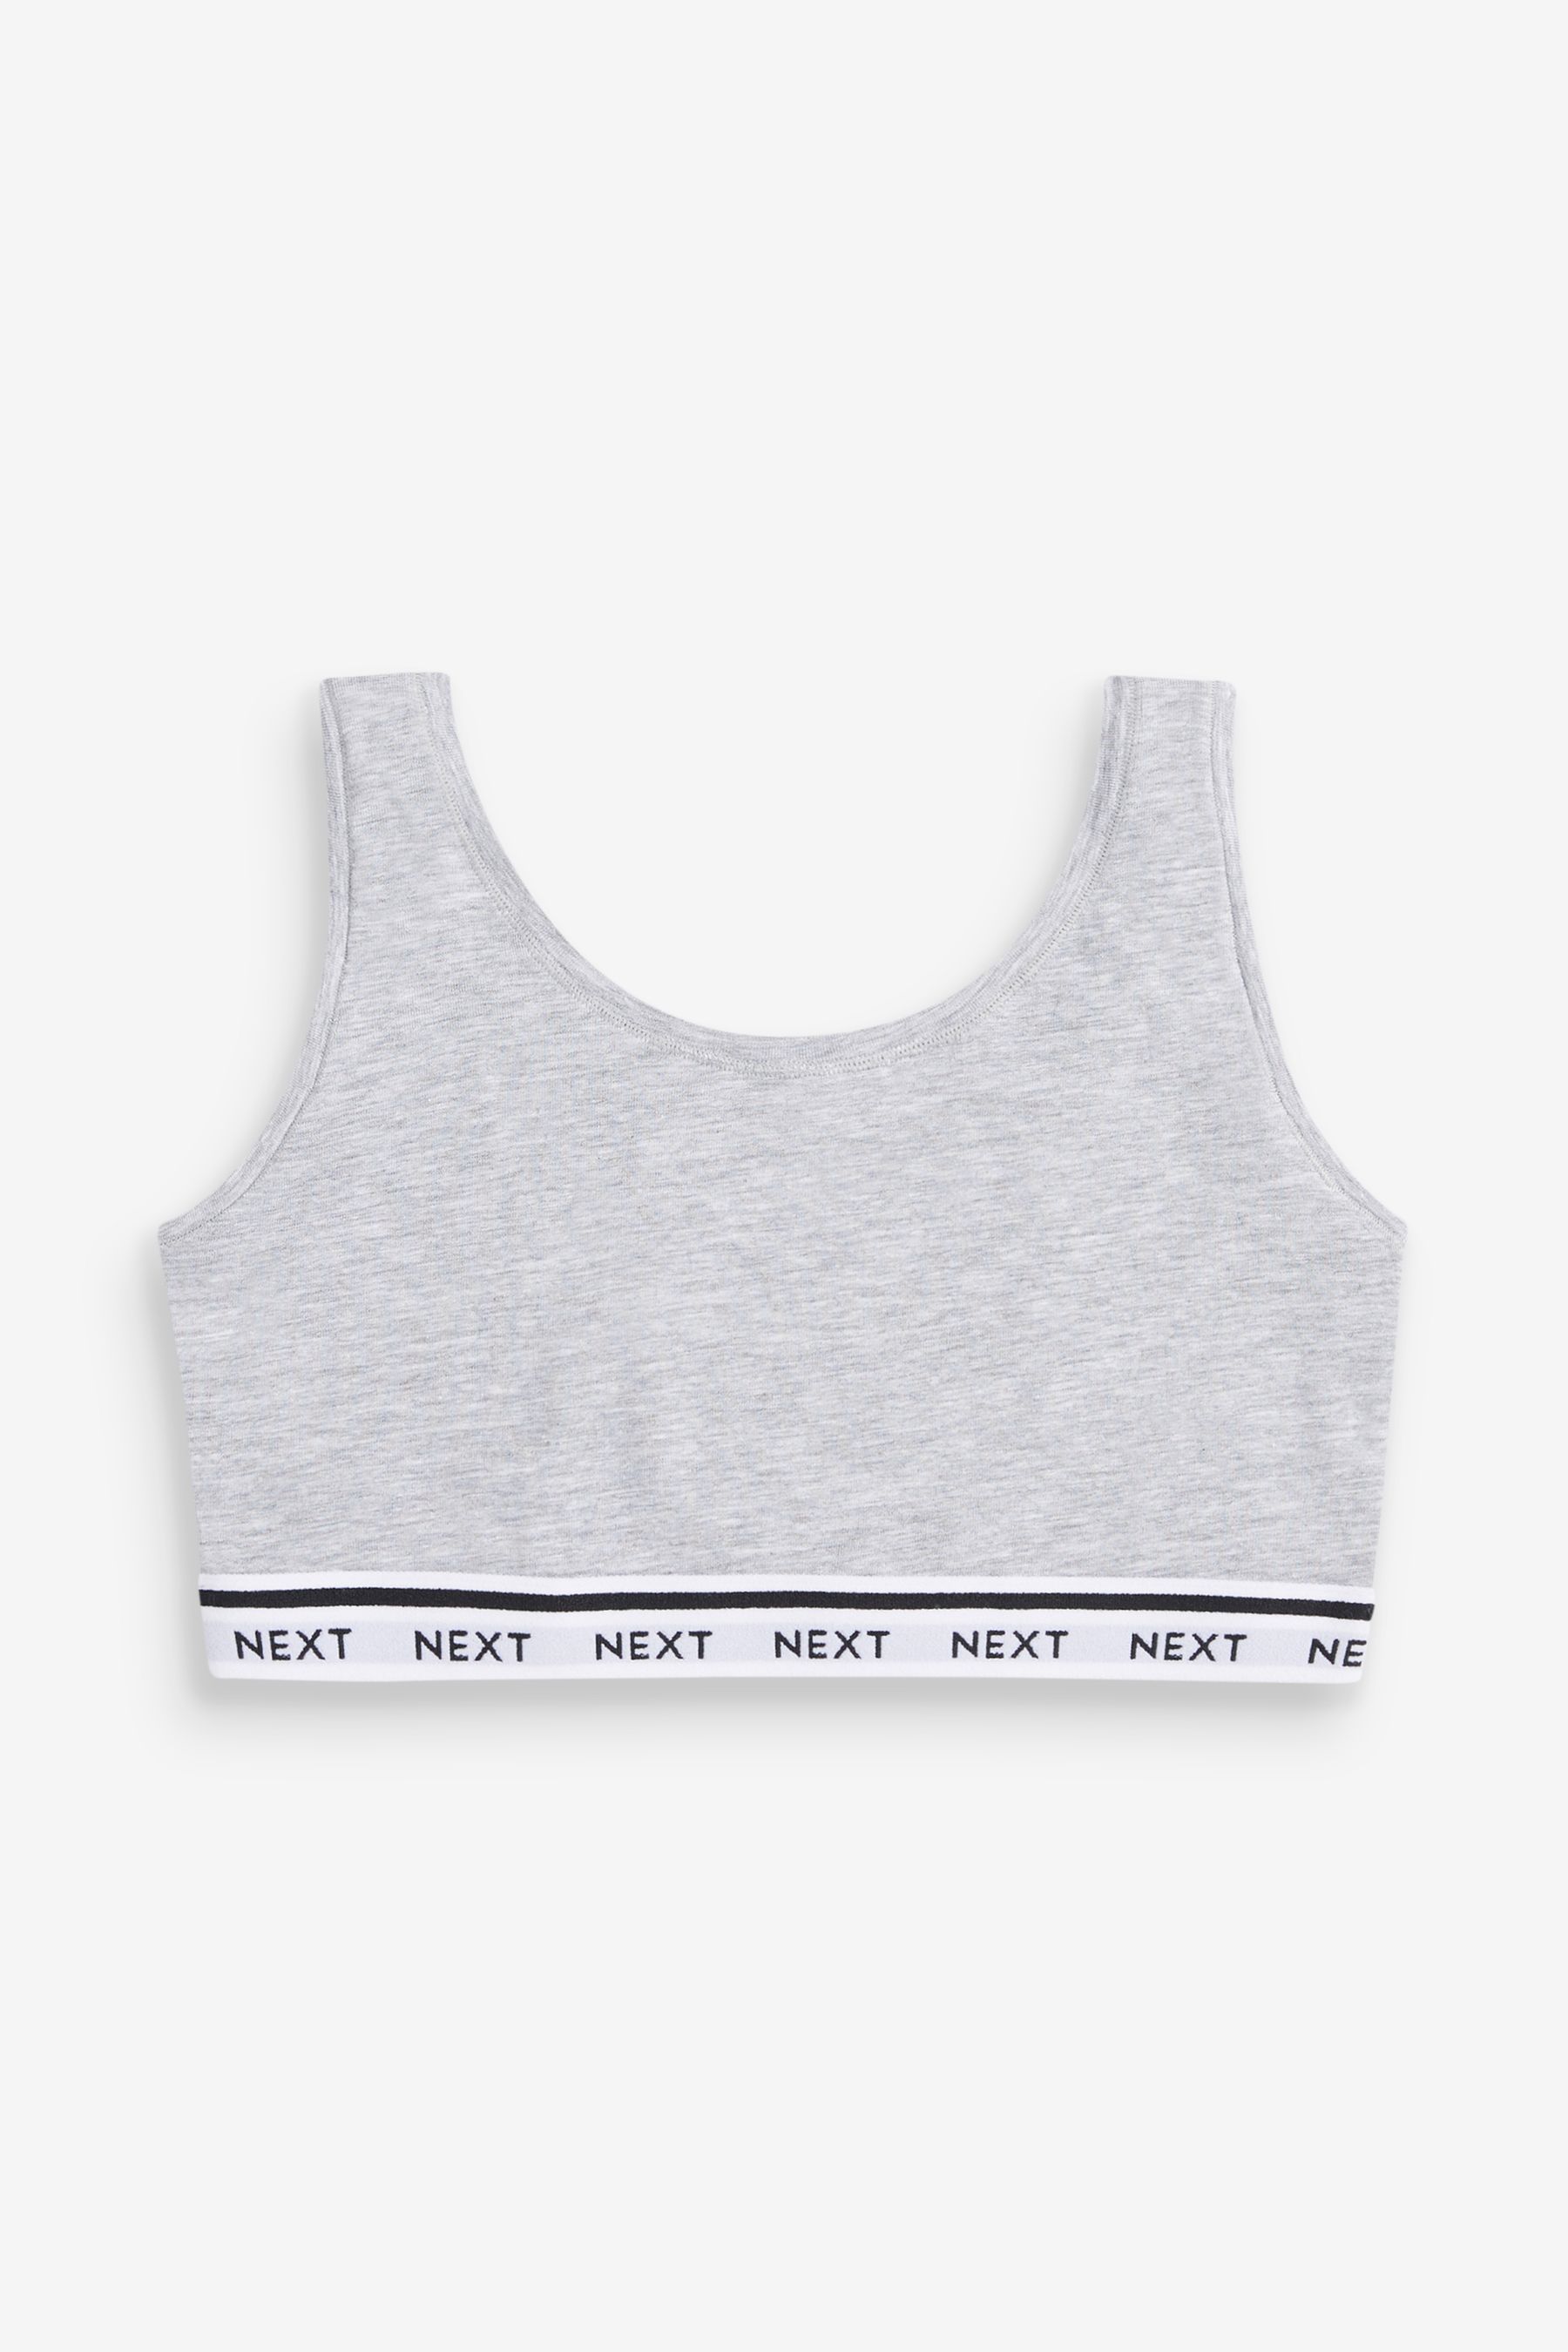 Post Surgery Crop Tops 2 Pack